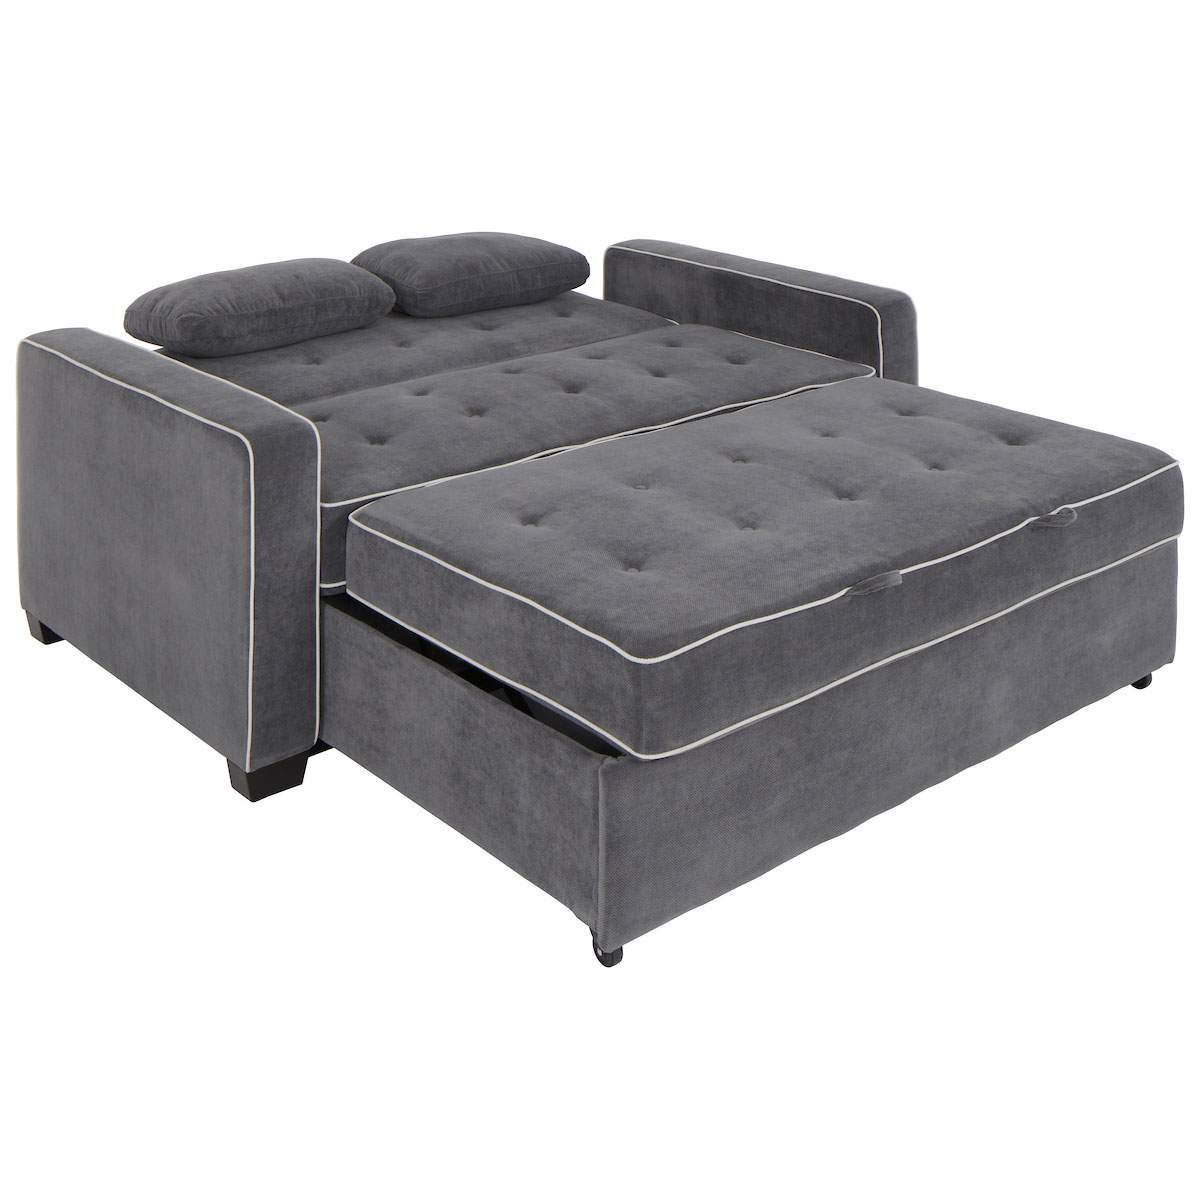 Supreme Pull Out Sofa Bed Fold Away Couch Throughout 3 In 1 Gray Pull Out Sleeper Sofas (Gallery 12 of 20)